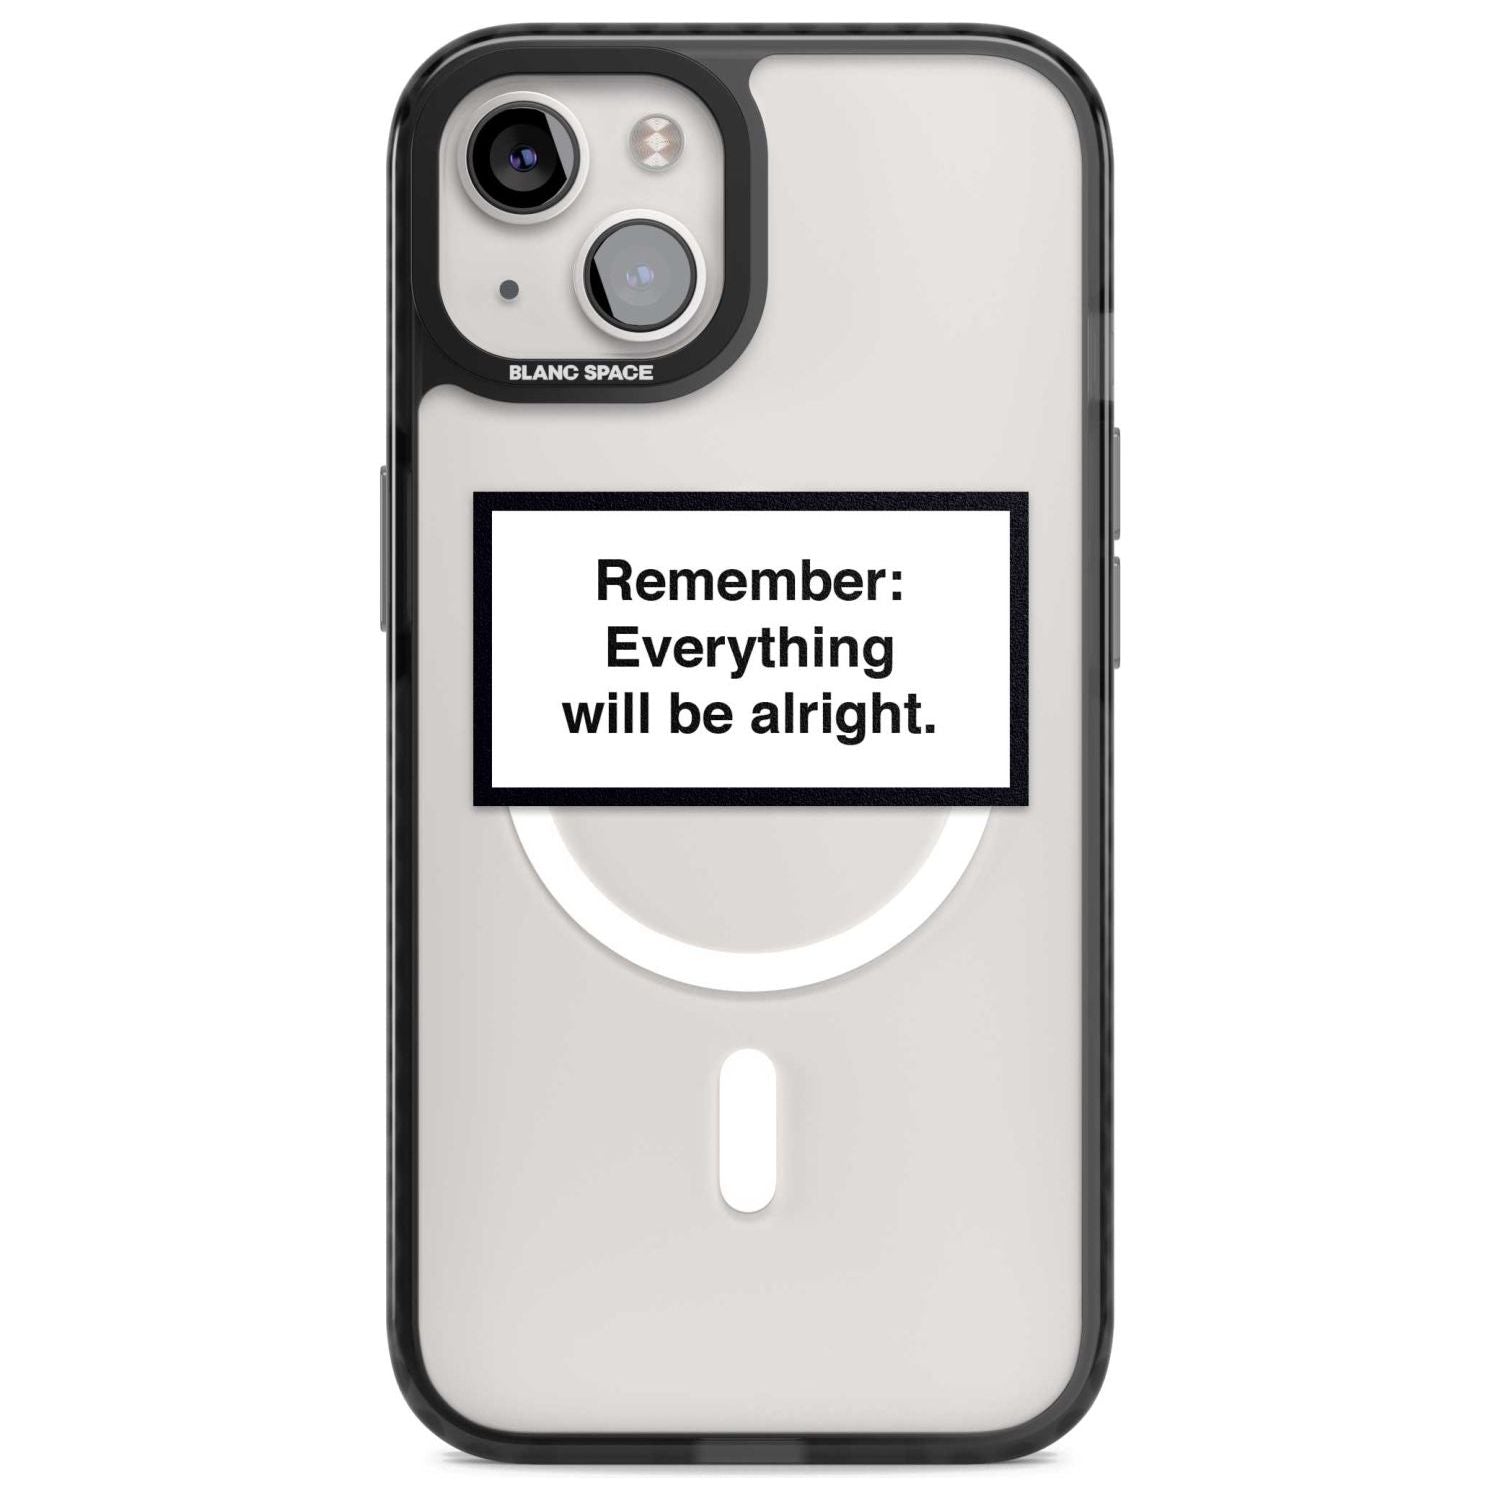 Everything Will Be Alright Phone Case iPhone 15 Plus / Magsafe Black Impact Case,iPhone 15 / Magsafe Black Impact Case,iPhone 14 Plus / Magsafe Black Impact Case,iPhone 14 / Magsafe Black Impact Case,iPhone 13 / Magsafe Black Impact Case Blanc Space